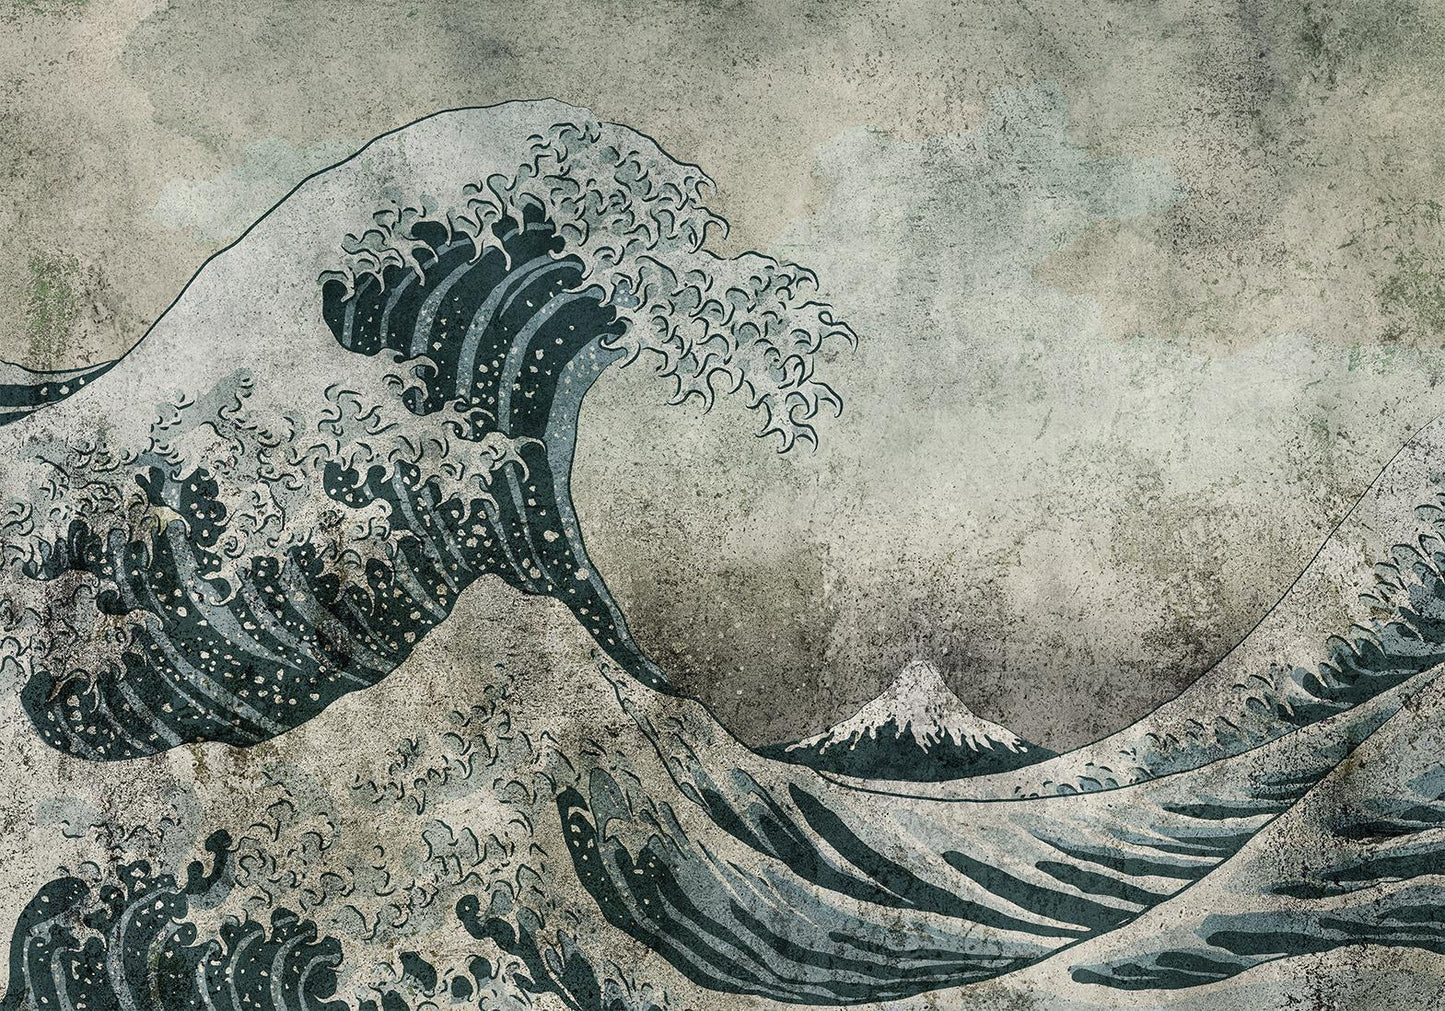 Wall Mural - Power of the Big Wave